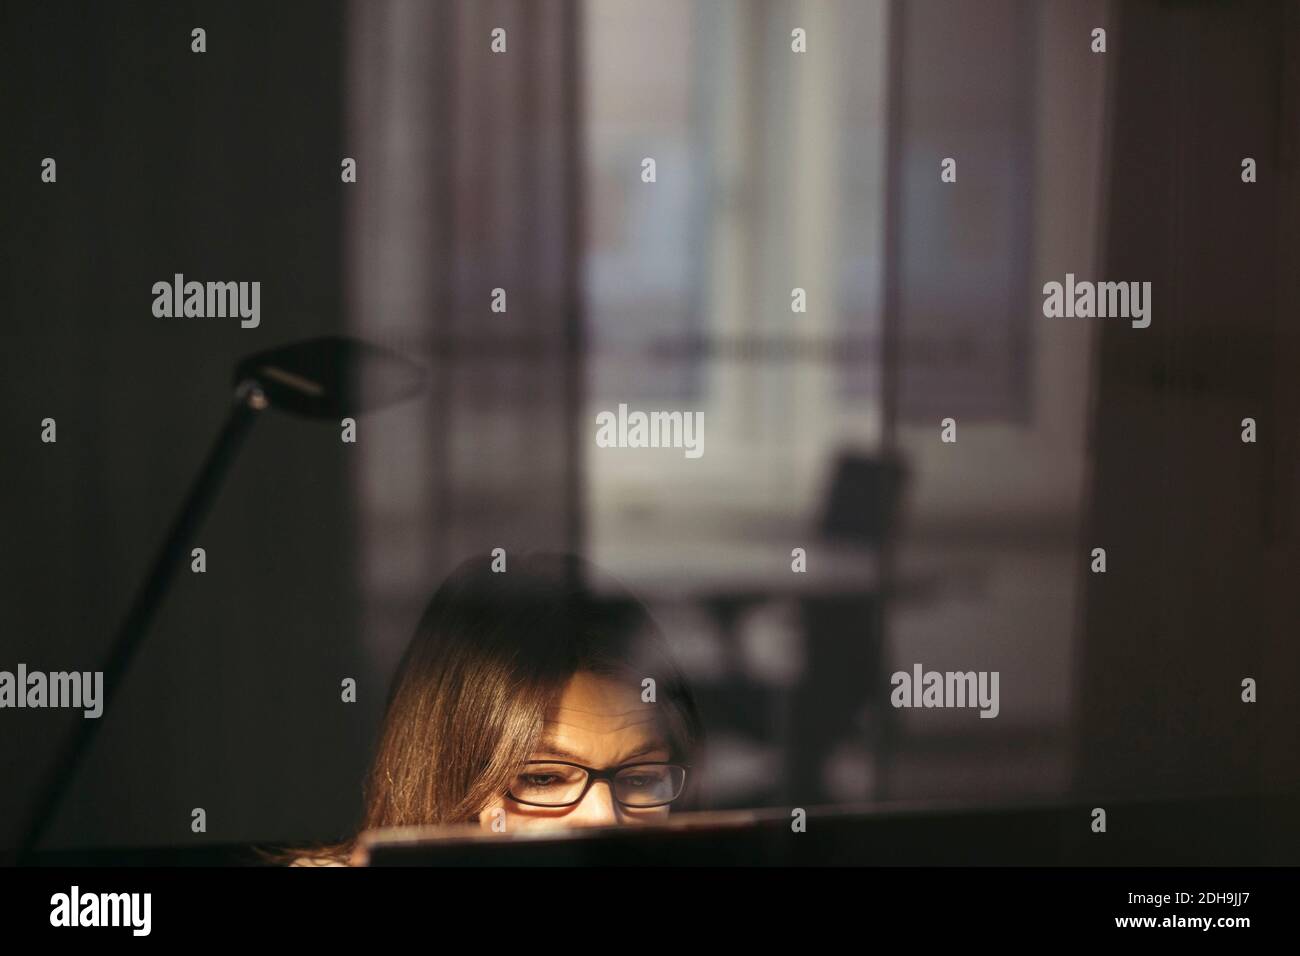 Businesswoman wearing eyeglasses using computer seen through glass at office Stock Photo